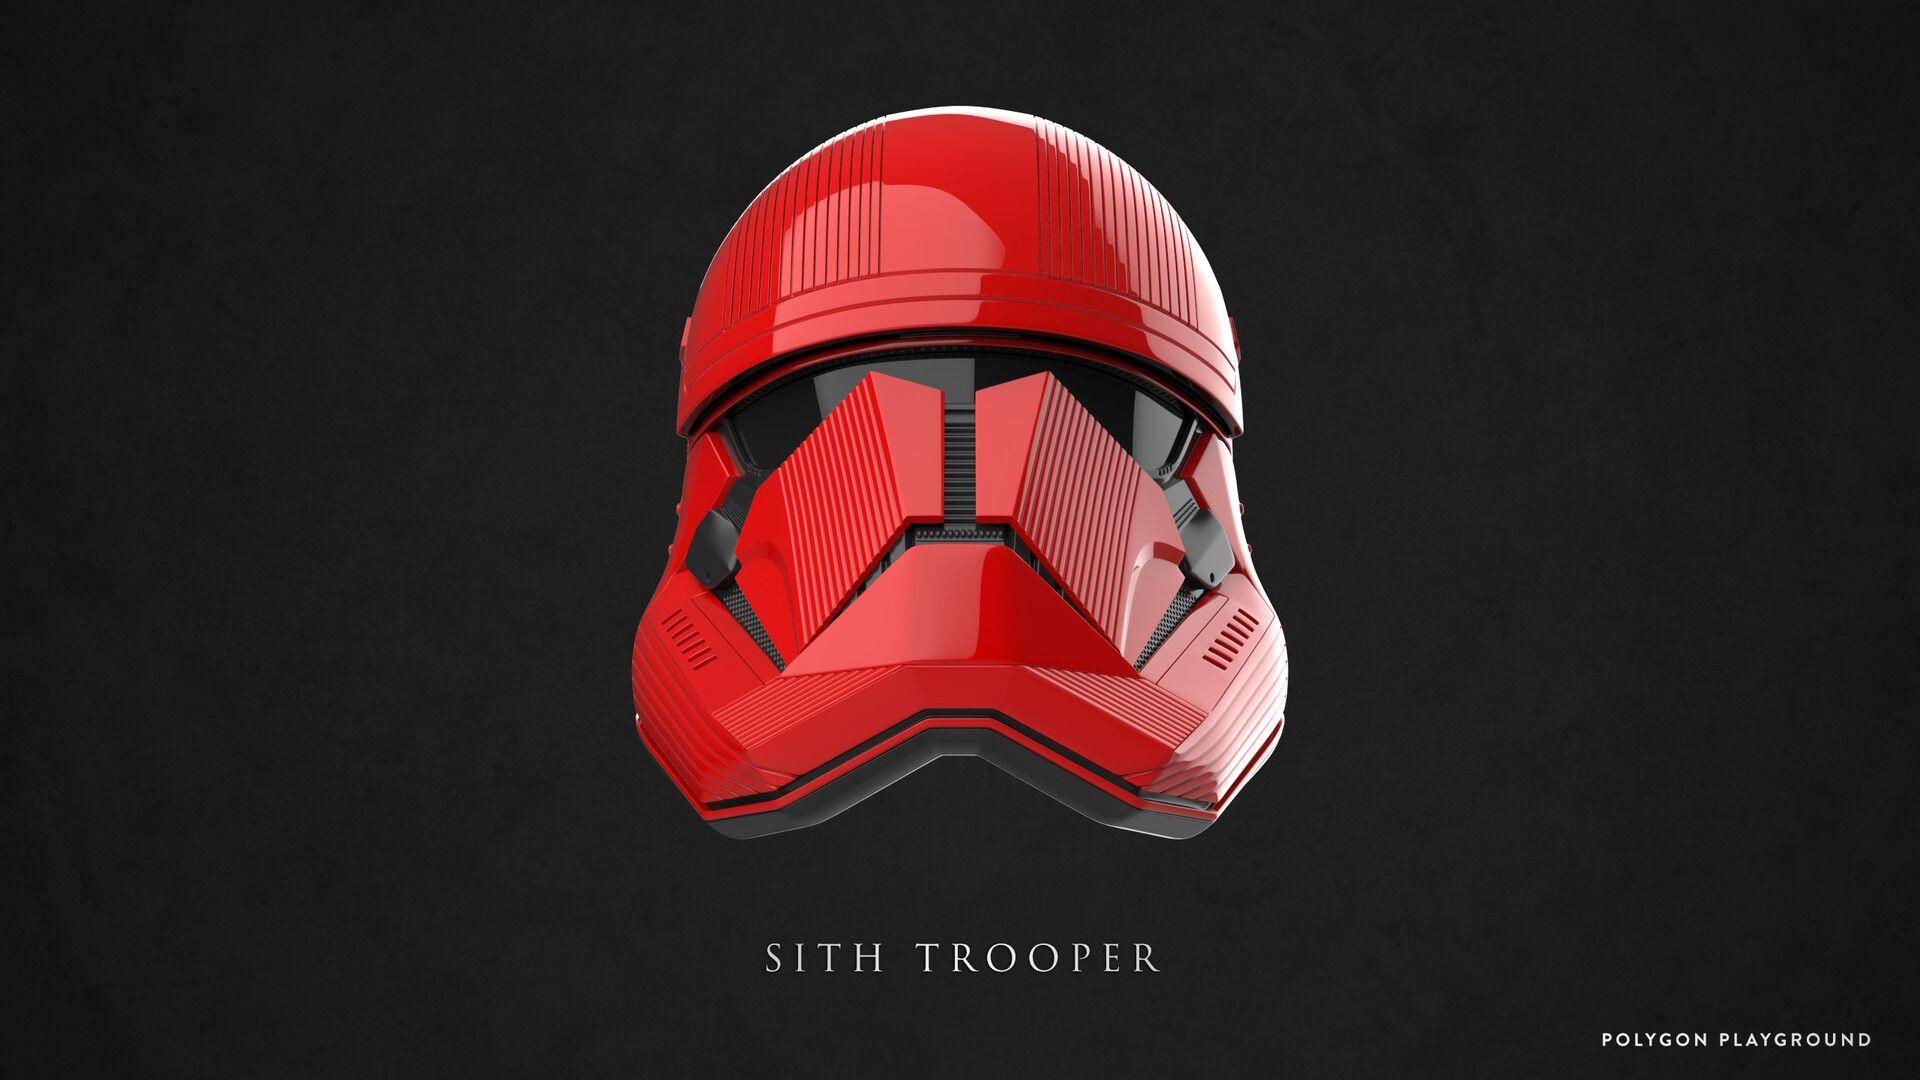 Sith Trooper Wallpapers.